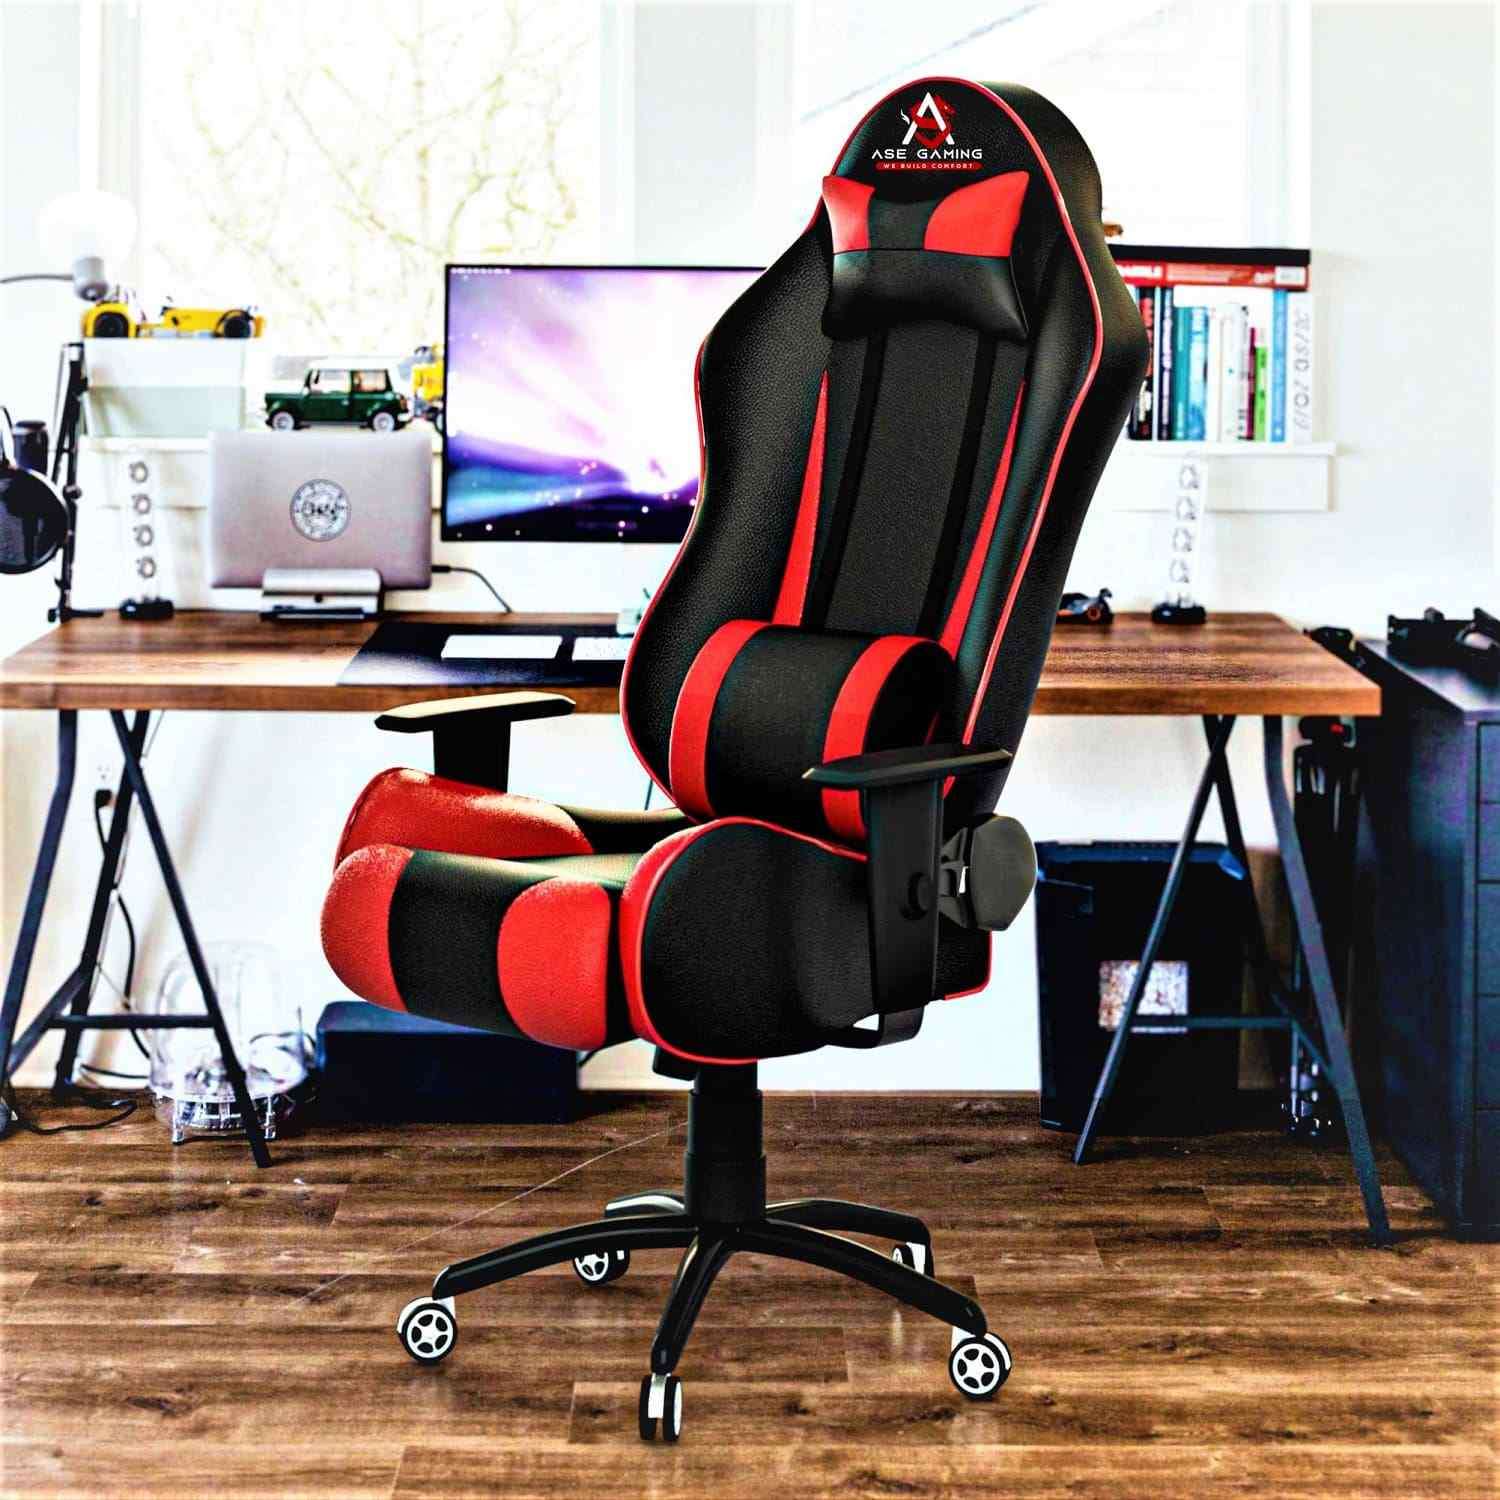 ASE Gaming Rage Series Gaming Chair with 180 Degree Recline (Blue & Black)